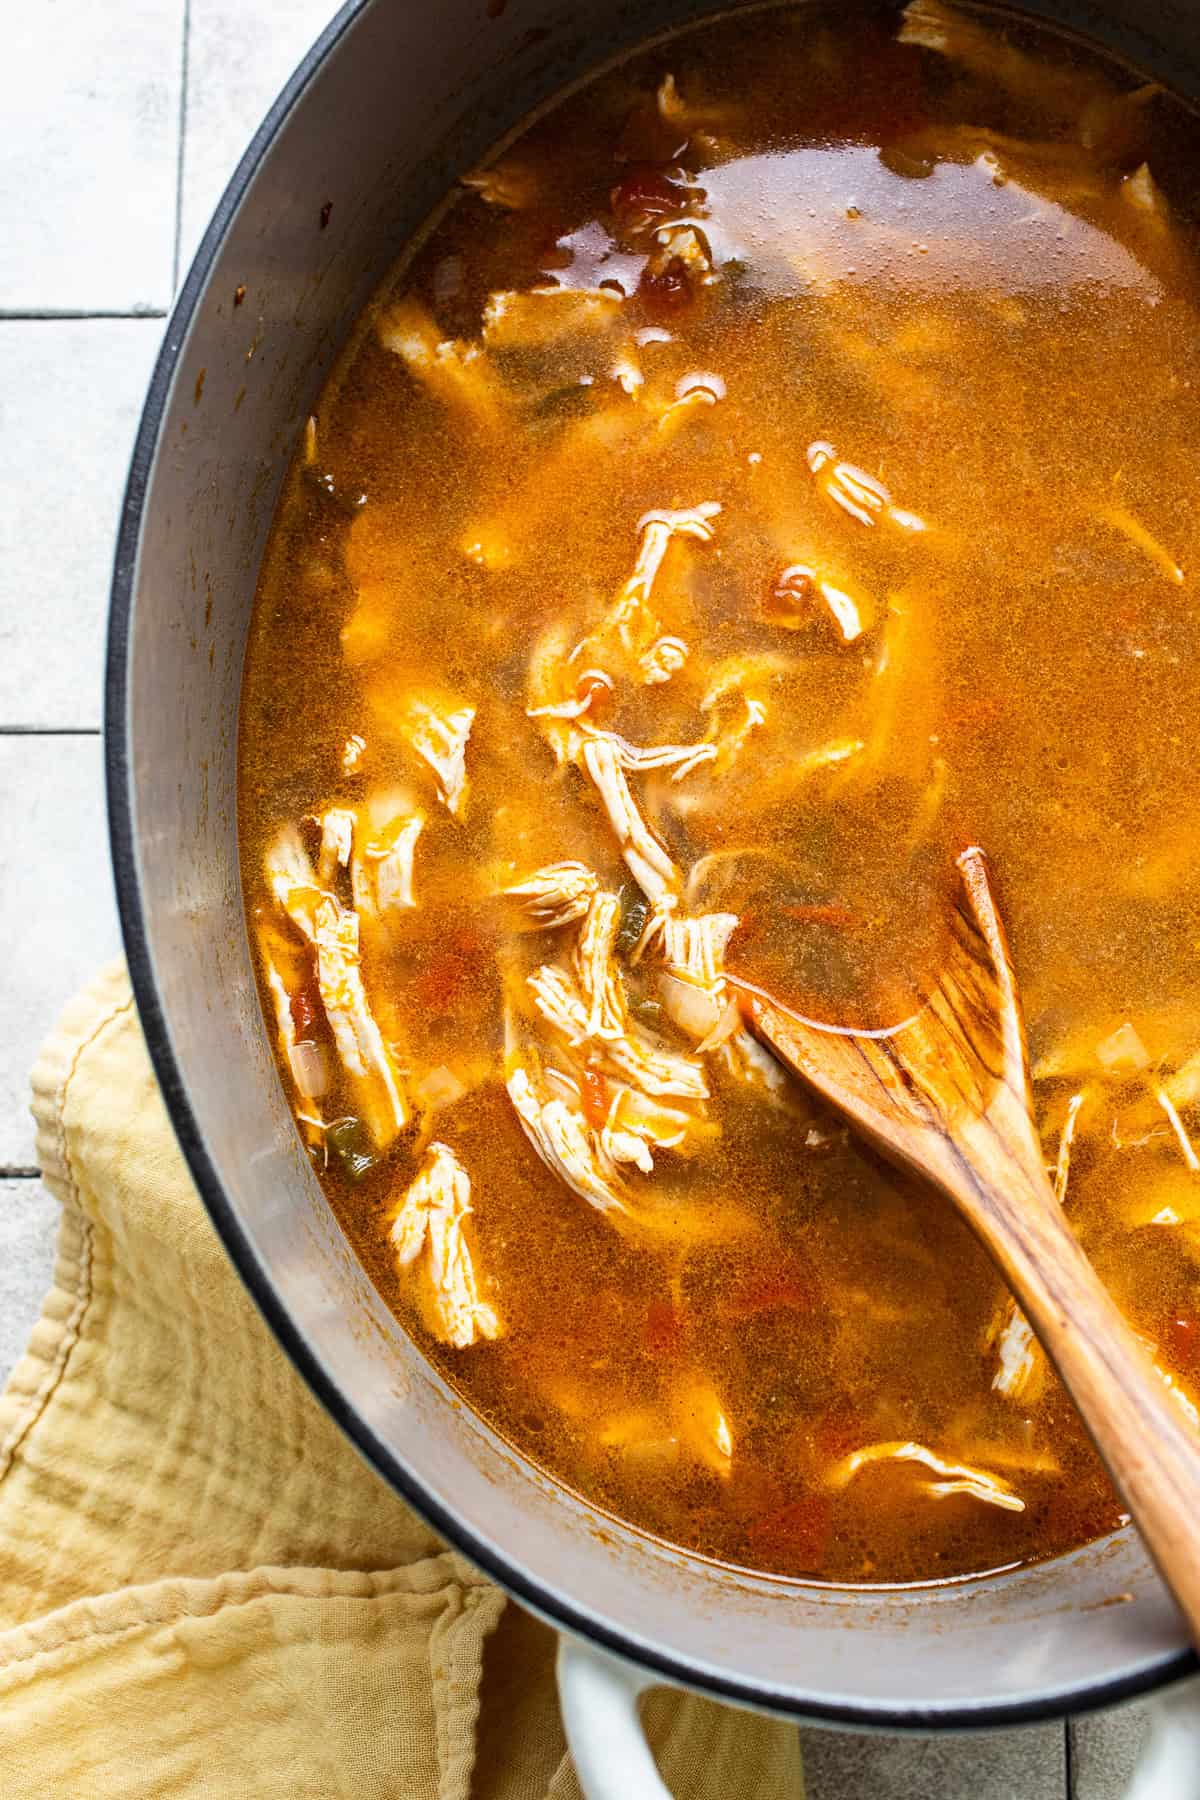 Sopa de lima with shredded chicken in a pot before serving.